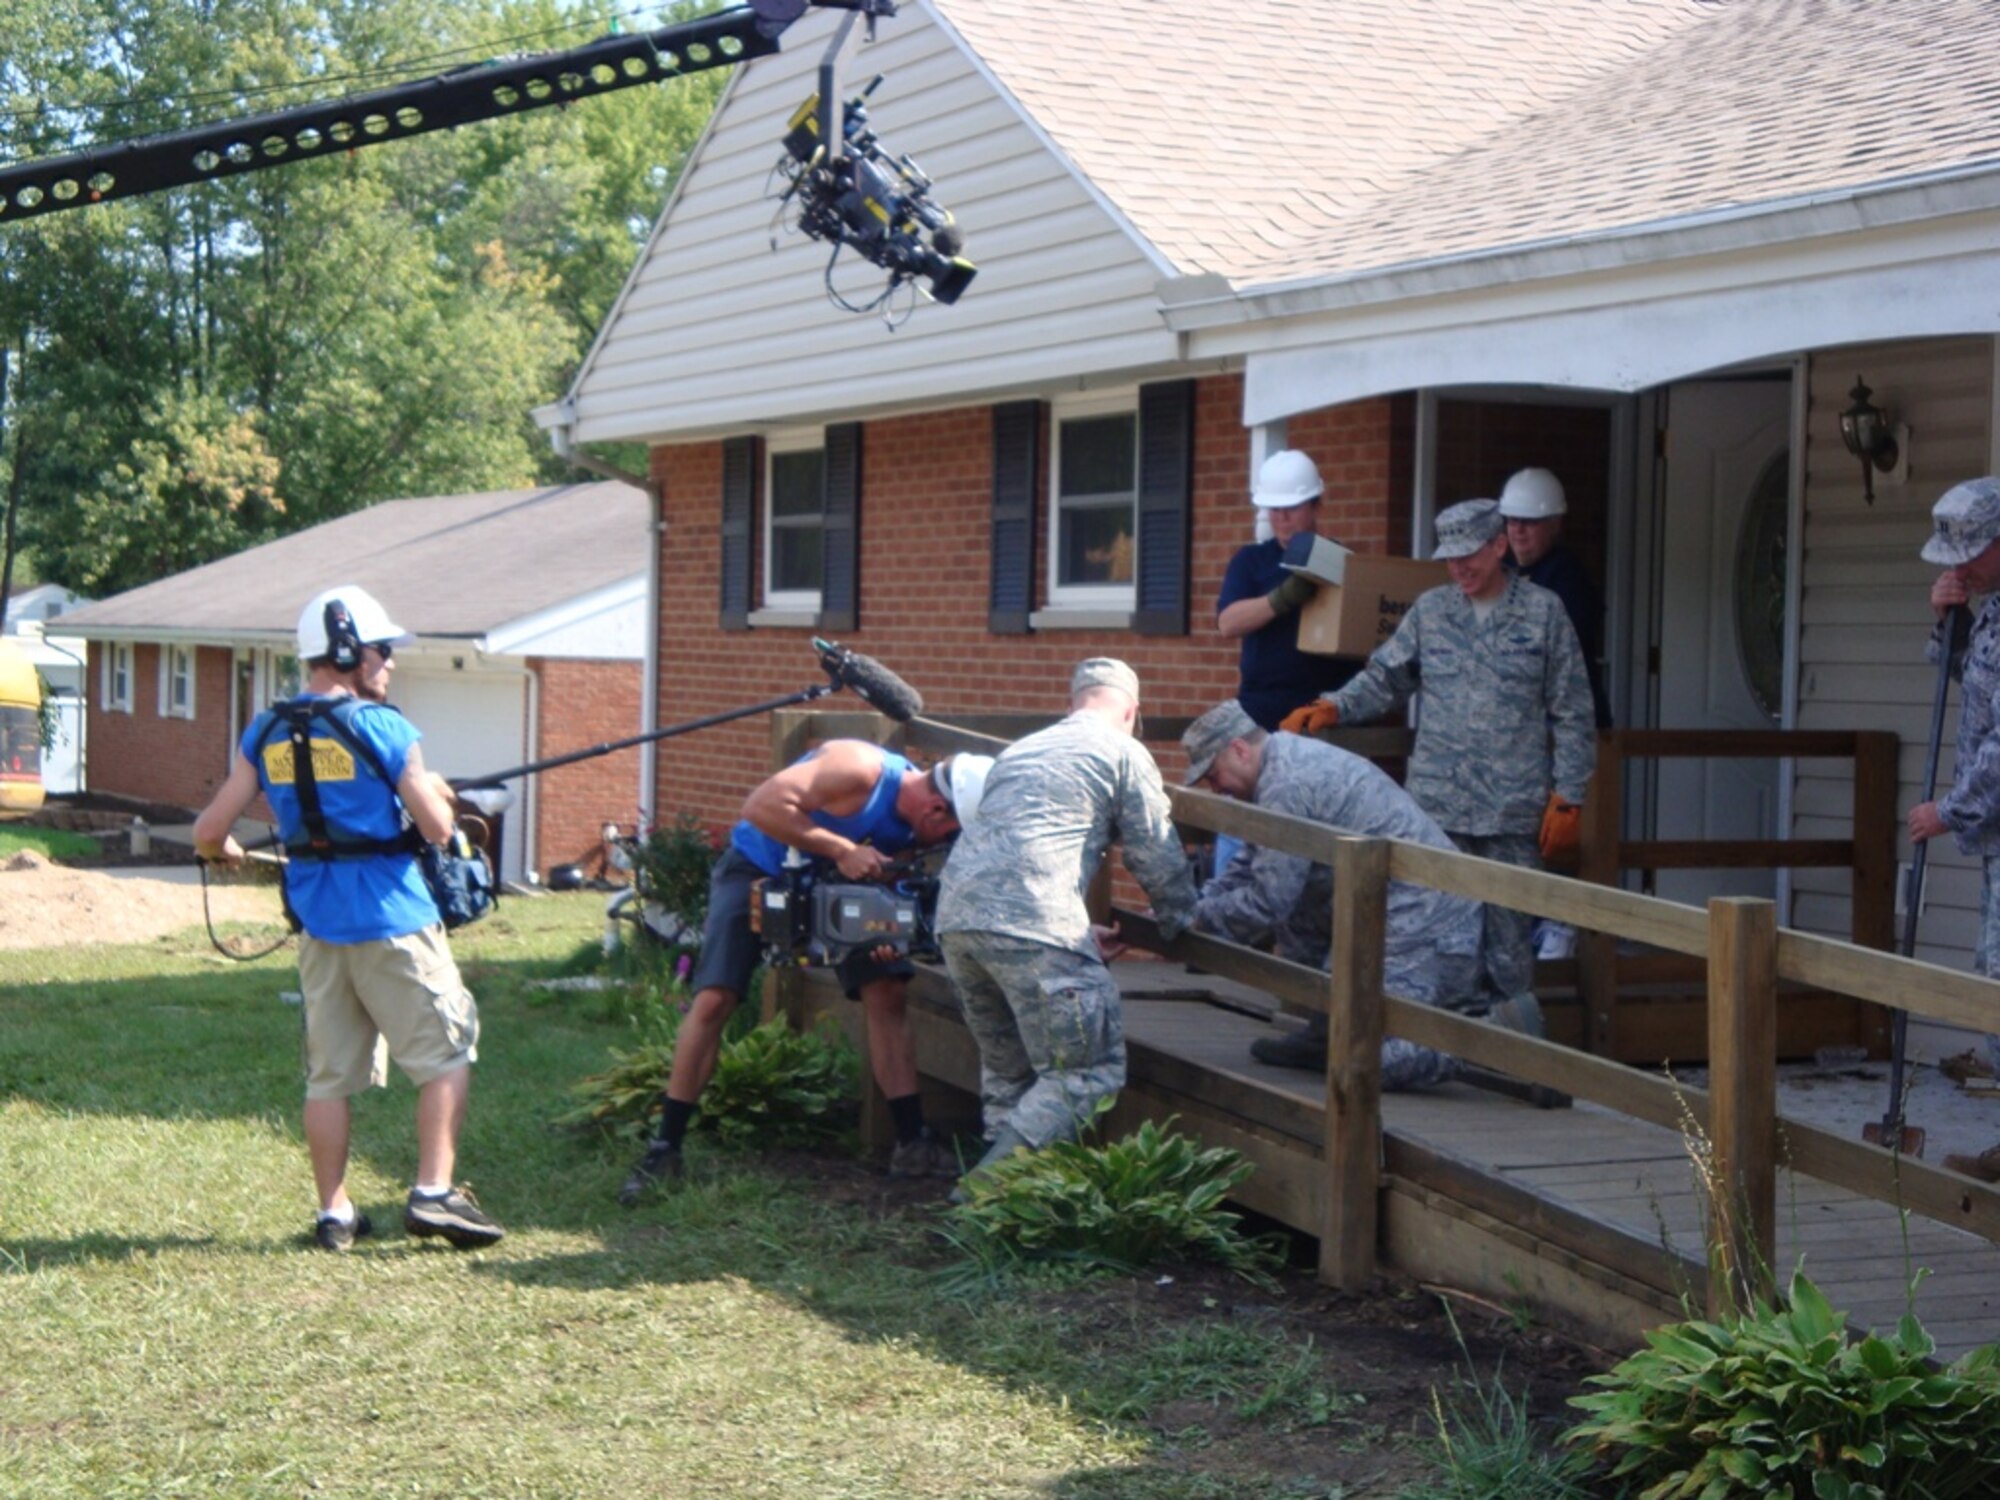 Air Force volunteers worked to remove a wheelchair ramp from the James
Terpenning home while "Extreme Makeover" camera crews videotaped the work.
(Air Force photo by Ron Fry)